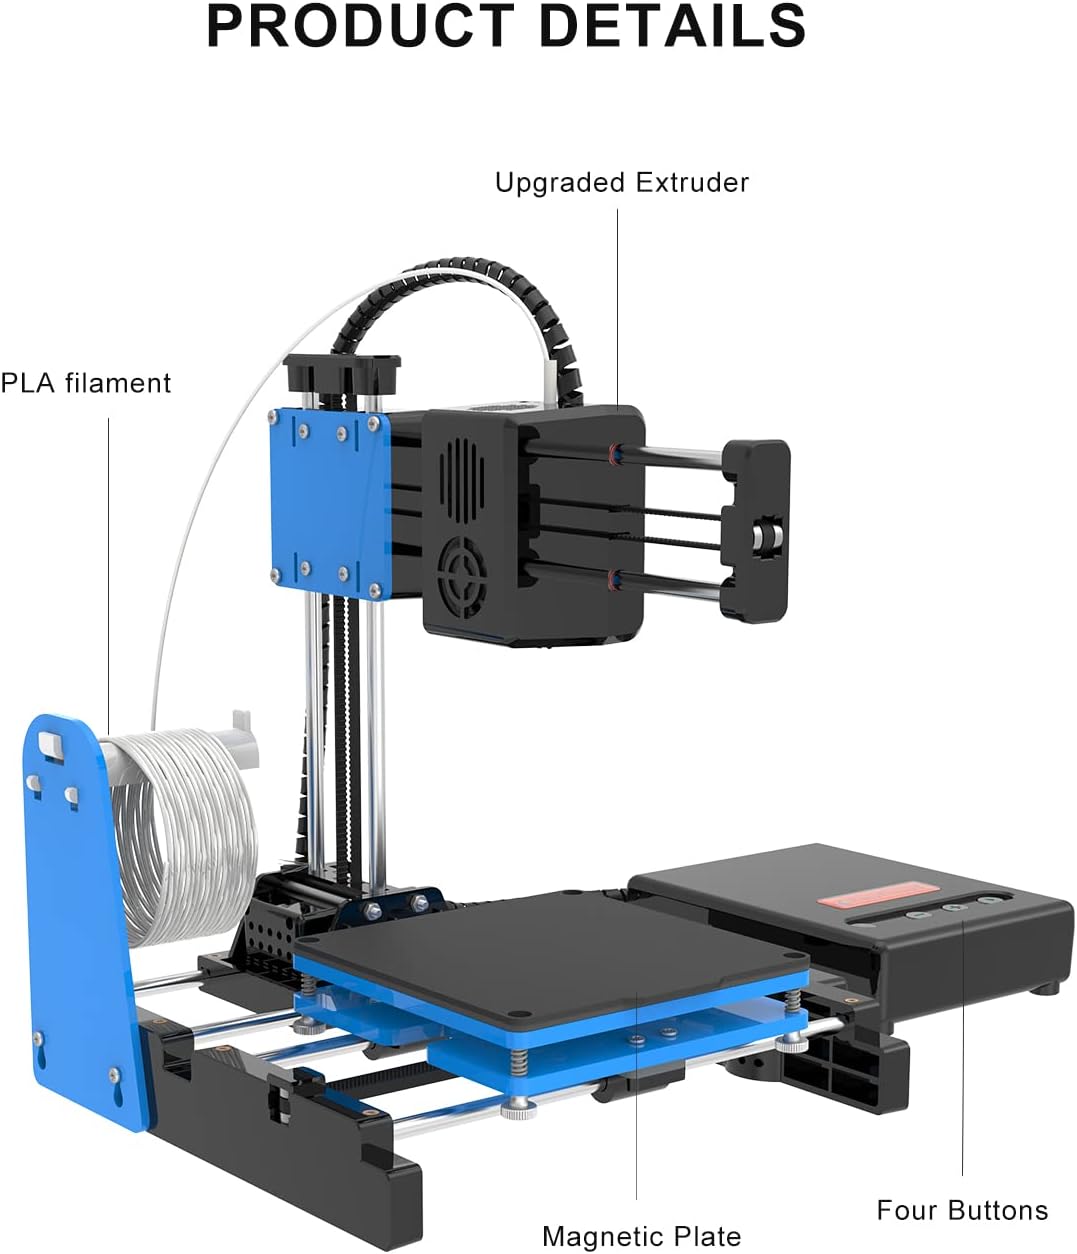 x1-fdm-mini-3d-printer-for-beginners-your-first-entry-level-3d-printer-high-printing-accuracy-new-upgraded-extruder-tech-3 X1 FDM Mini 3D Printer Review